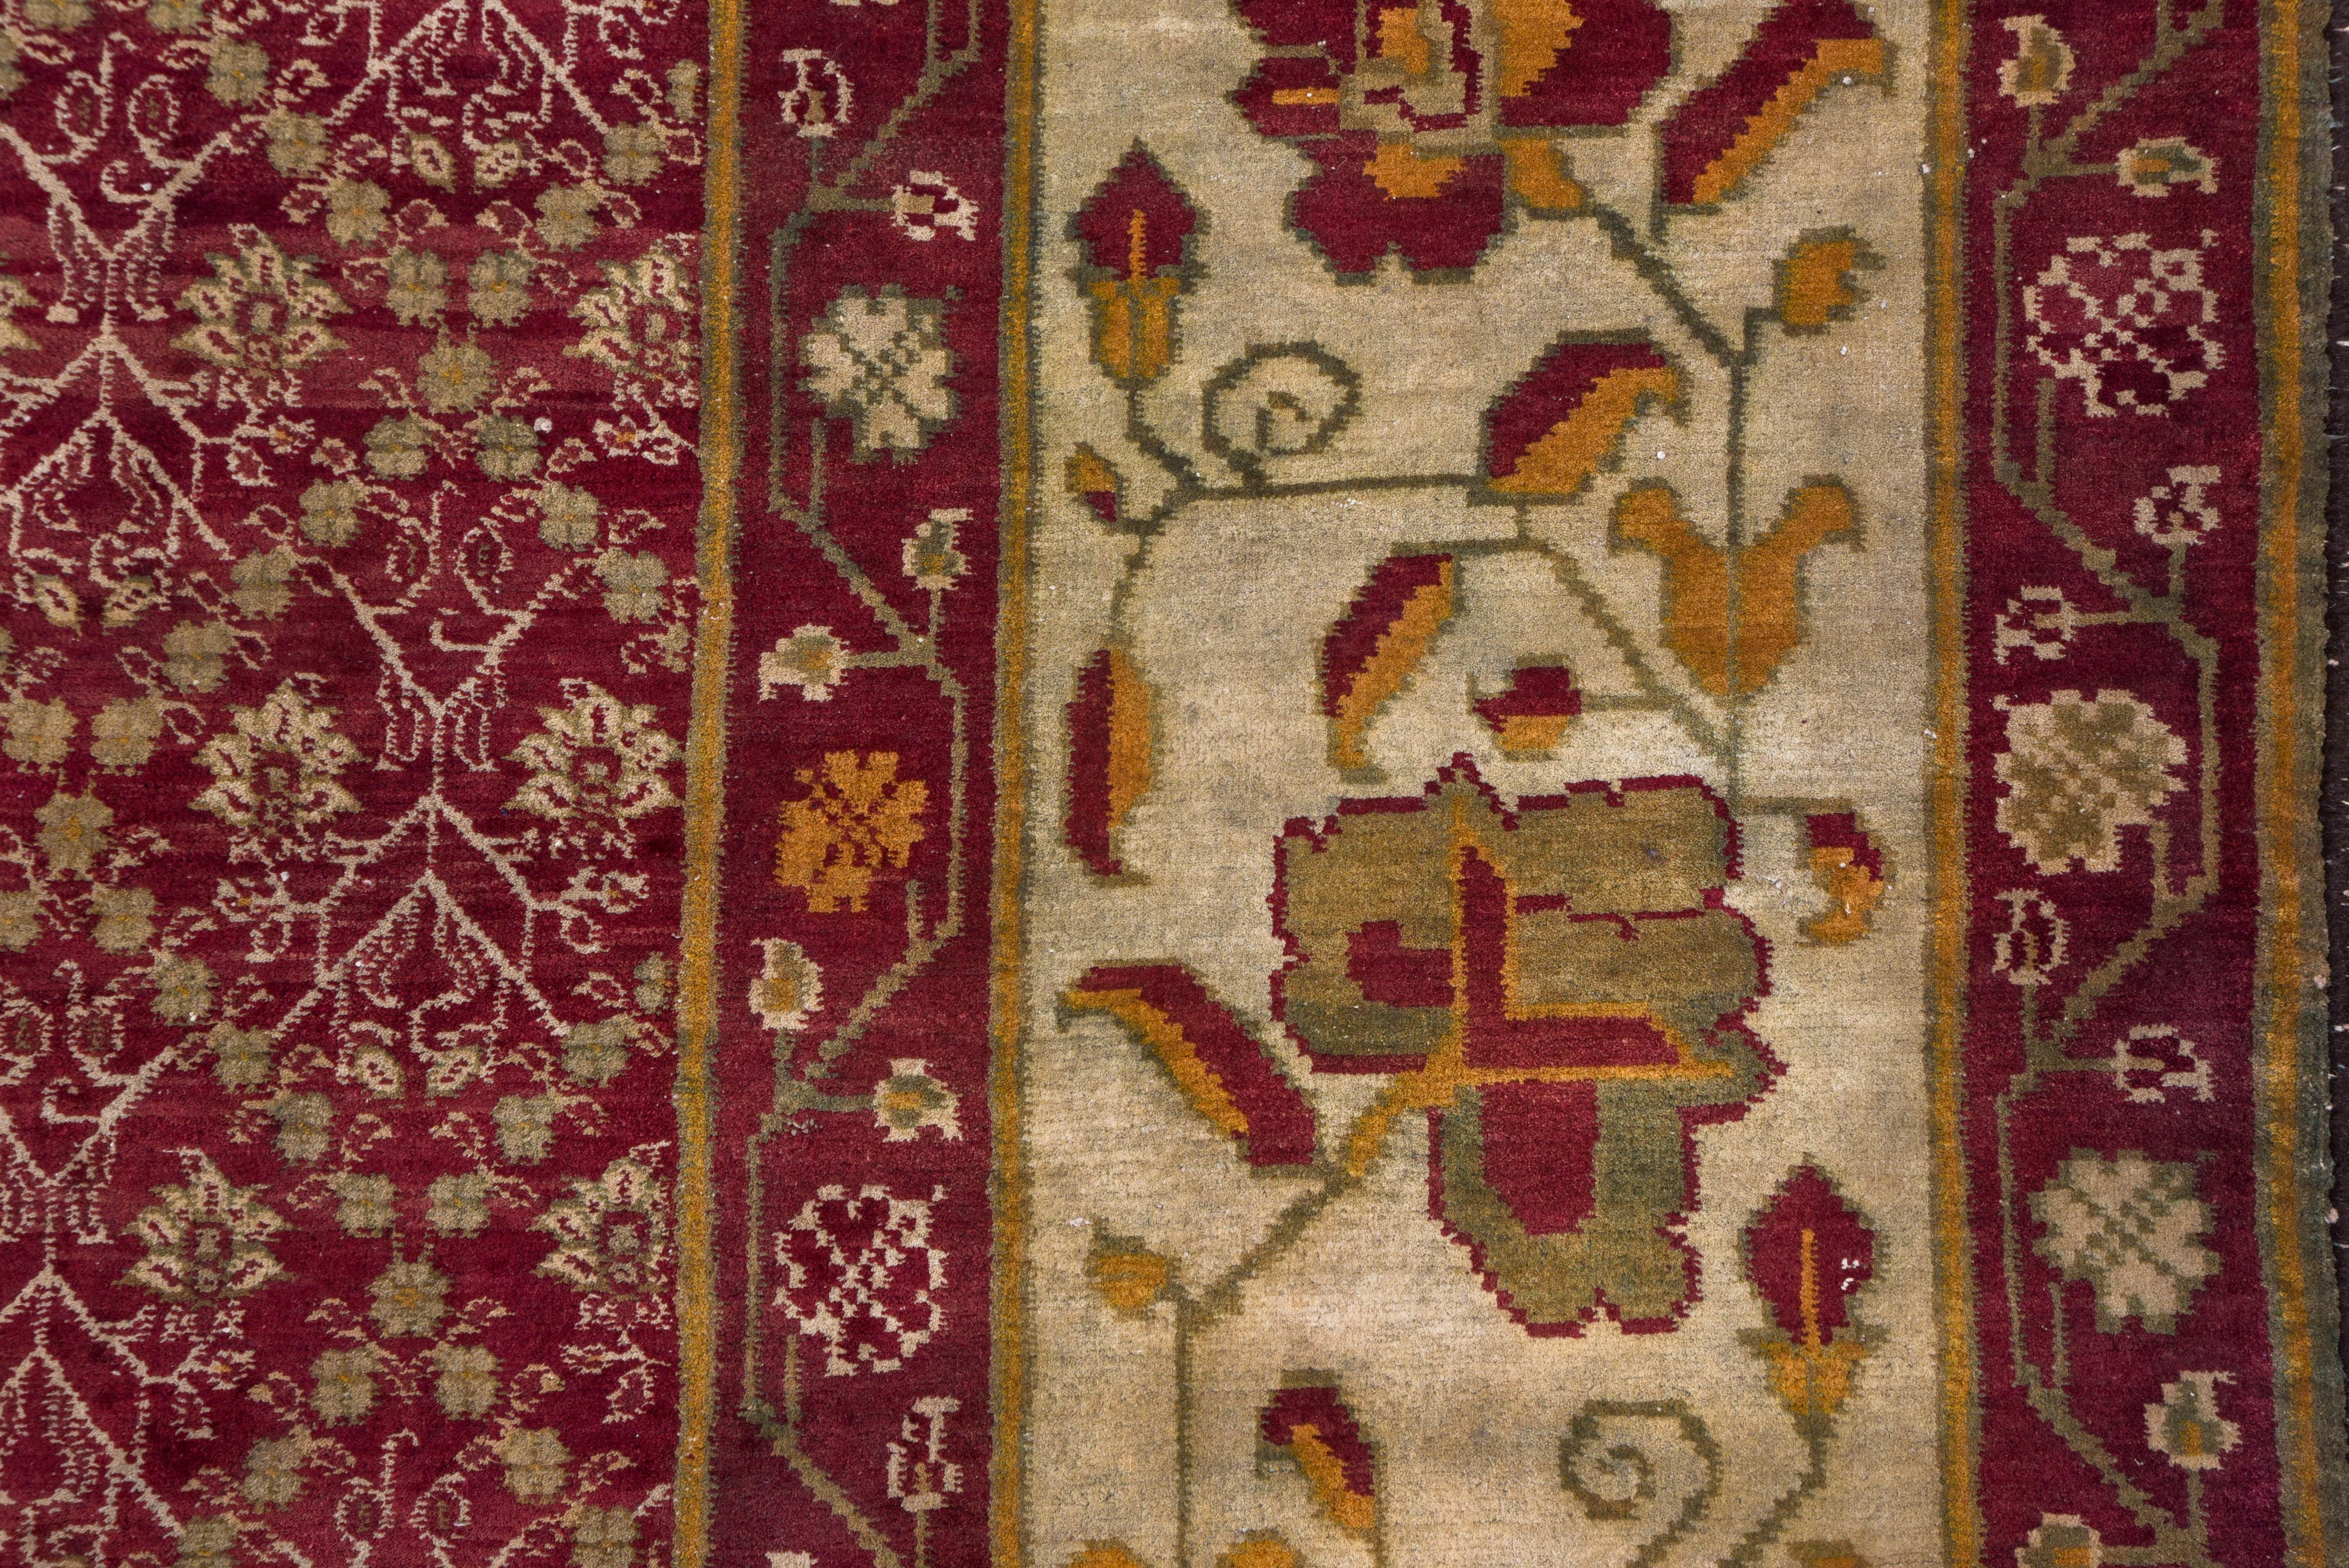 This palatial north Indian city carpet shows a repeating floral pattern constrained by a lozenge lattice, set within a wide sand border with tilted palmettes on an angular leafy vine.